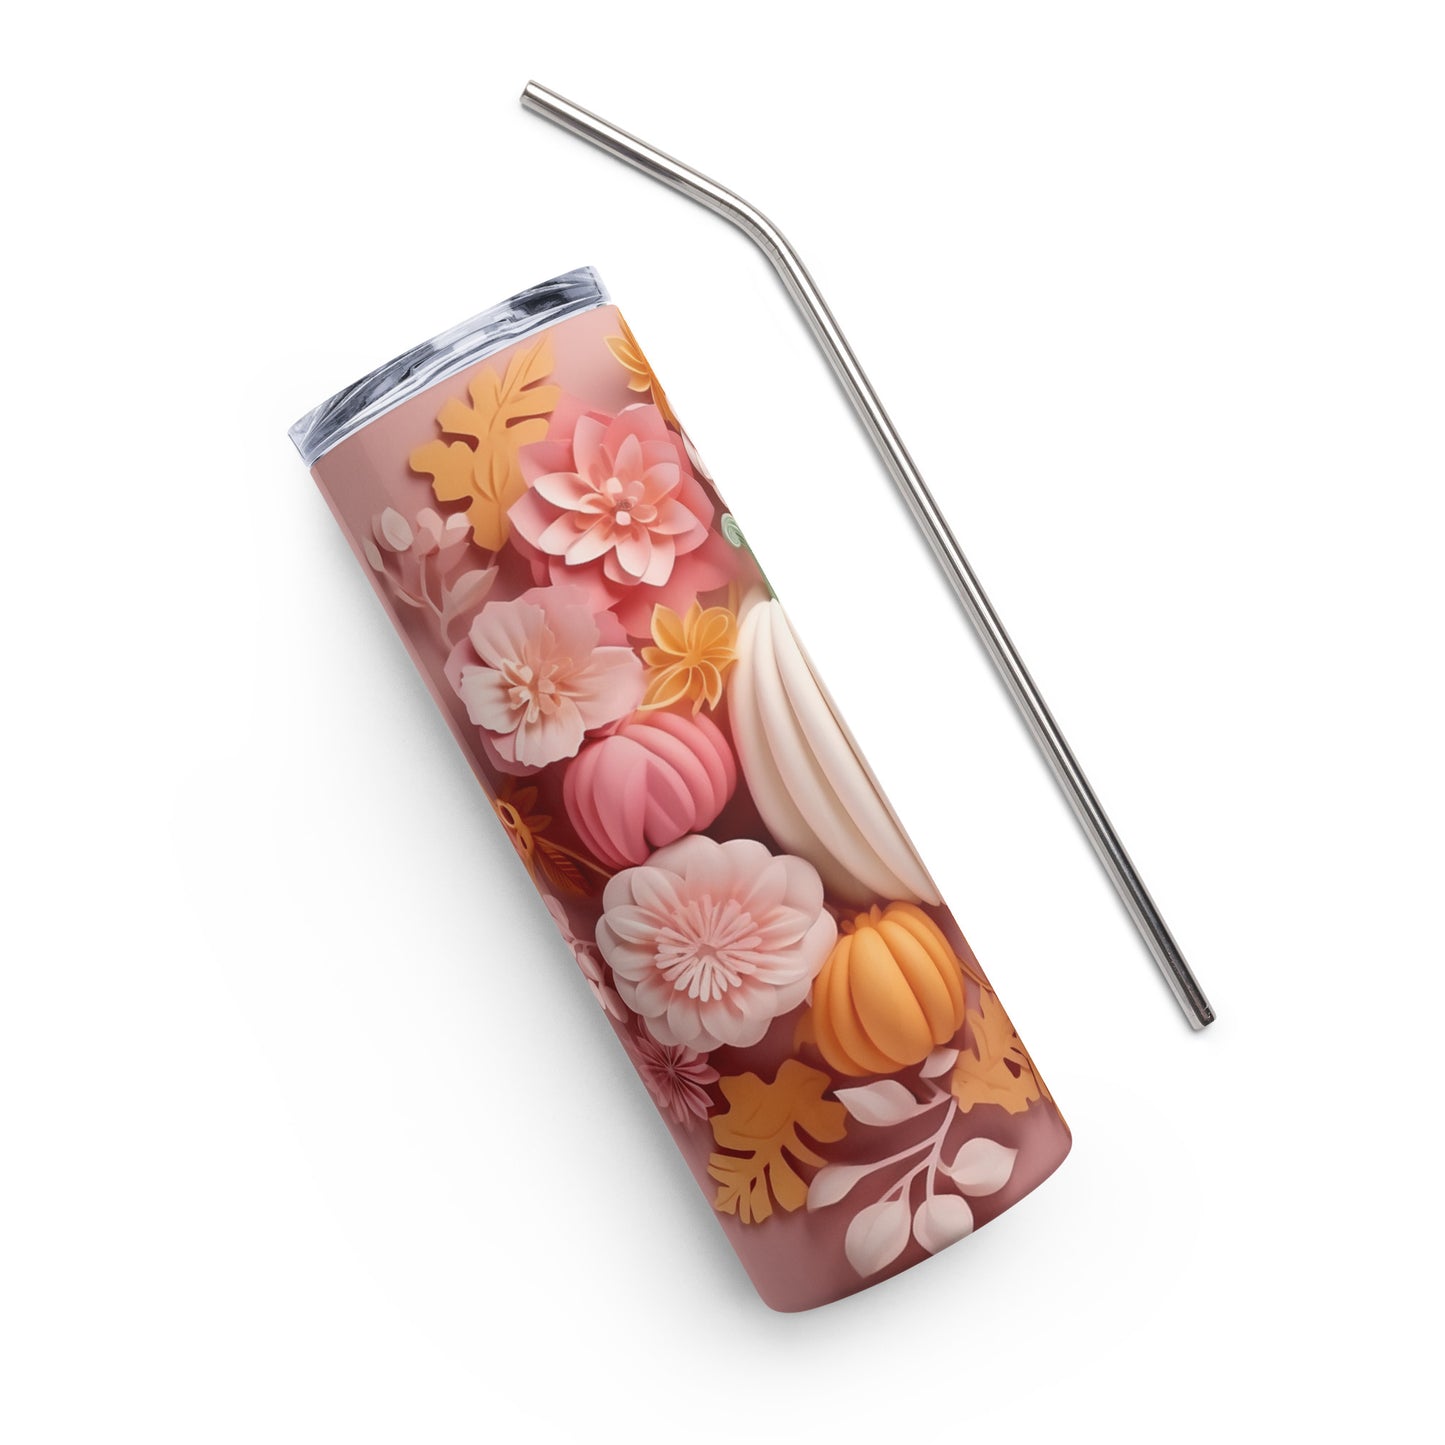 "Pink & Pretty Fall" 3D Stainless steel tumbler